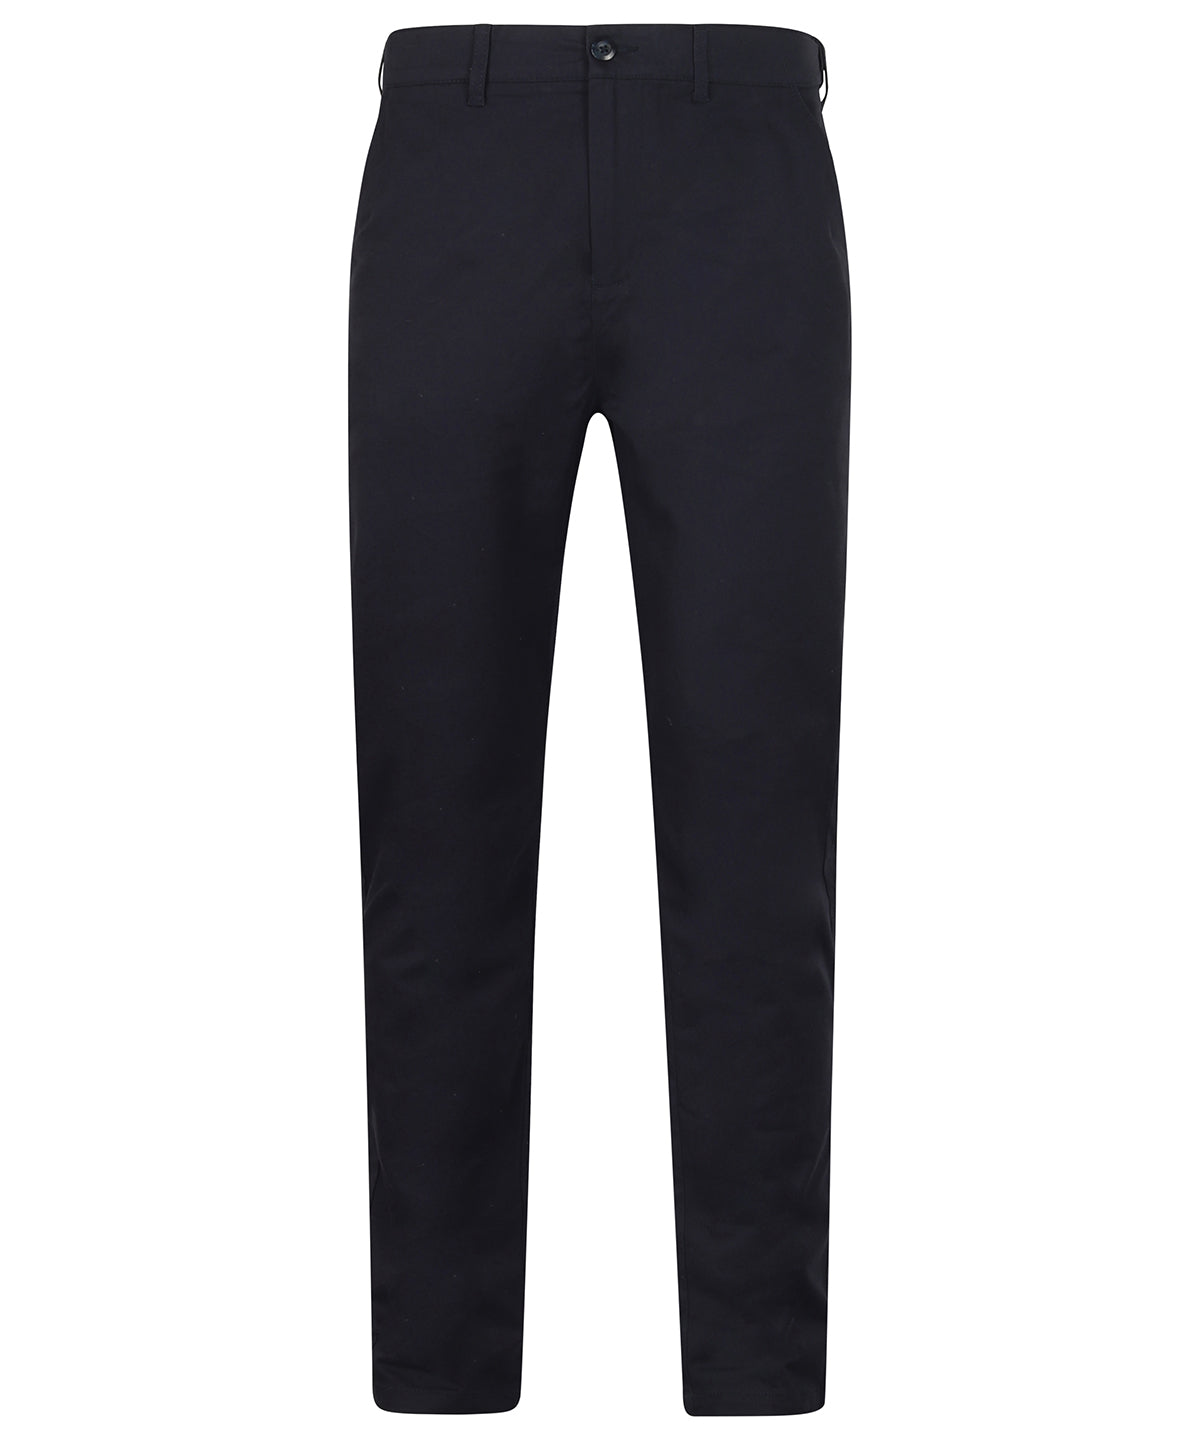 Personalised Trousers - Black Henbury Stretch chinos with flex waistband